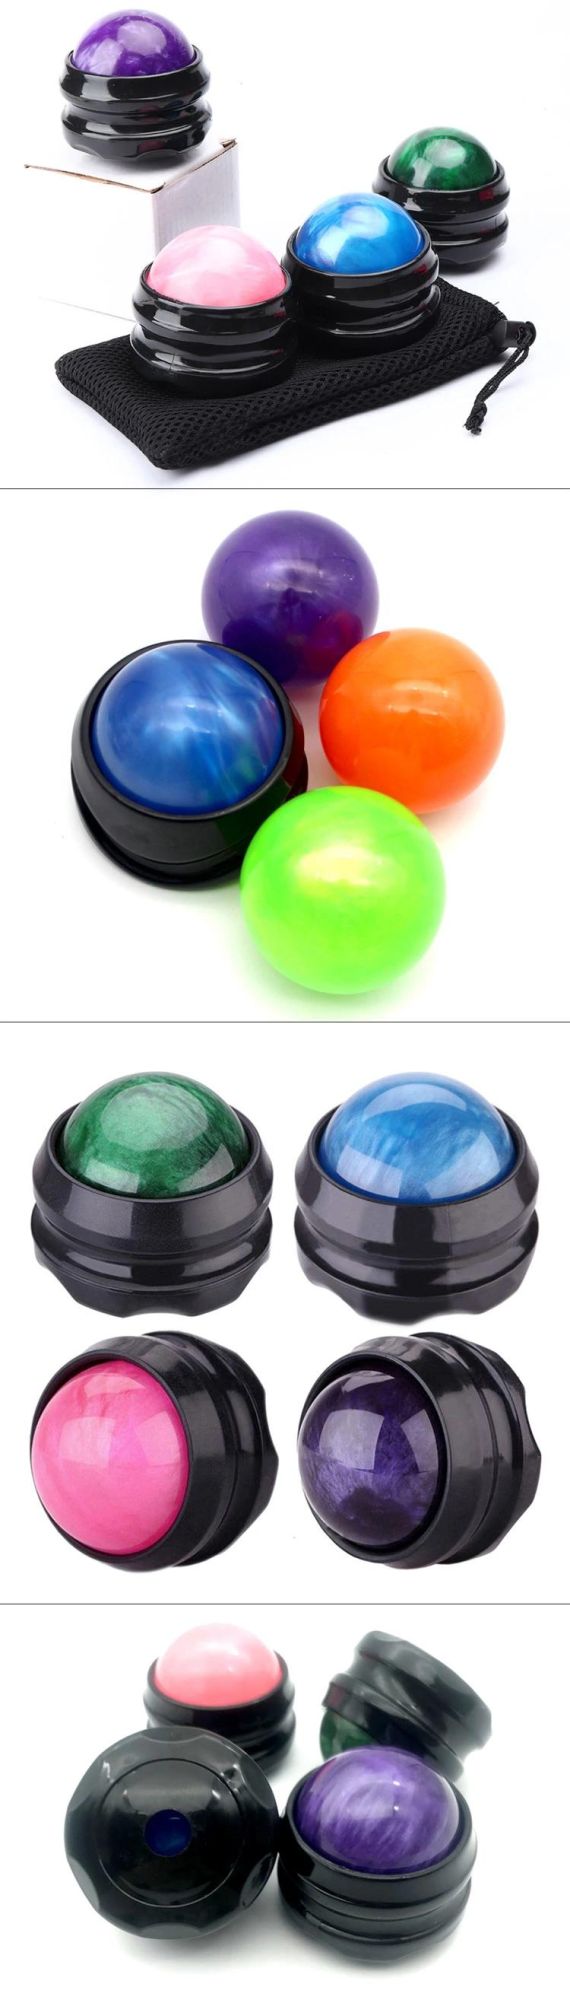 Durable Body Relaxing Therapy Cold Massage Ball Roller